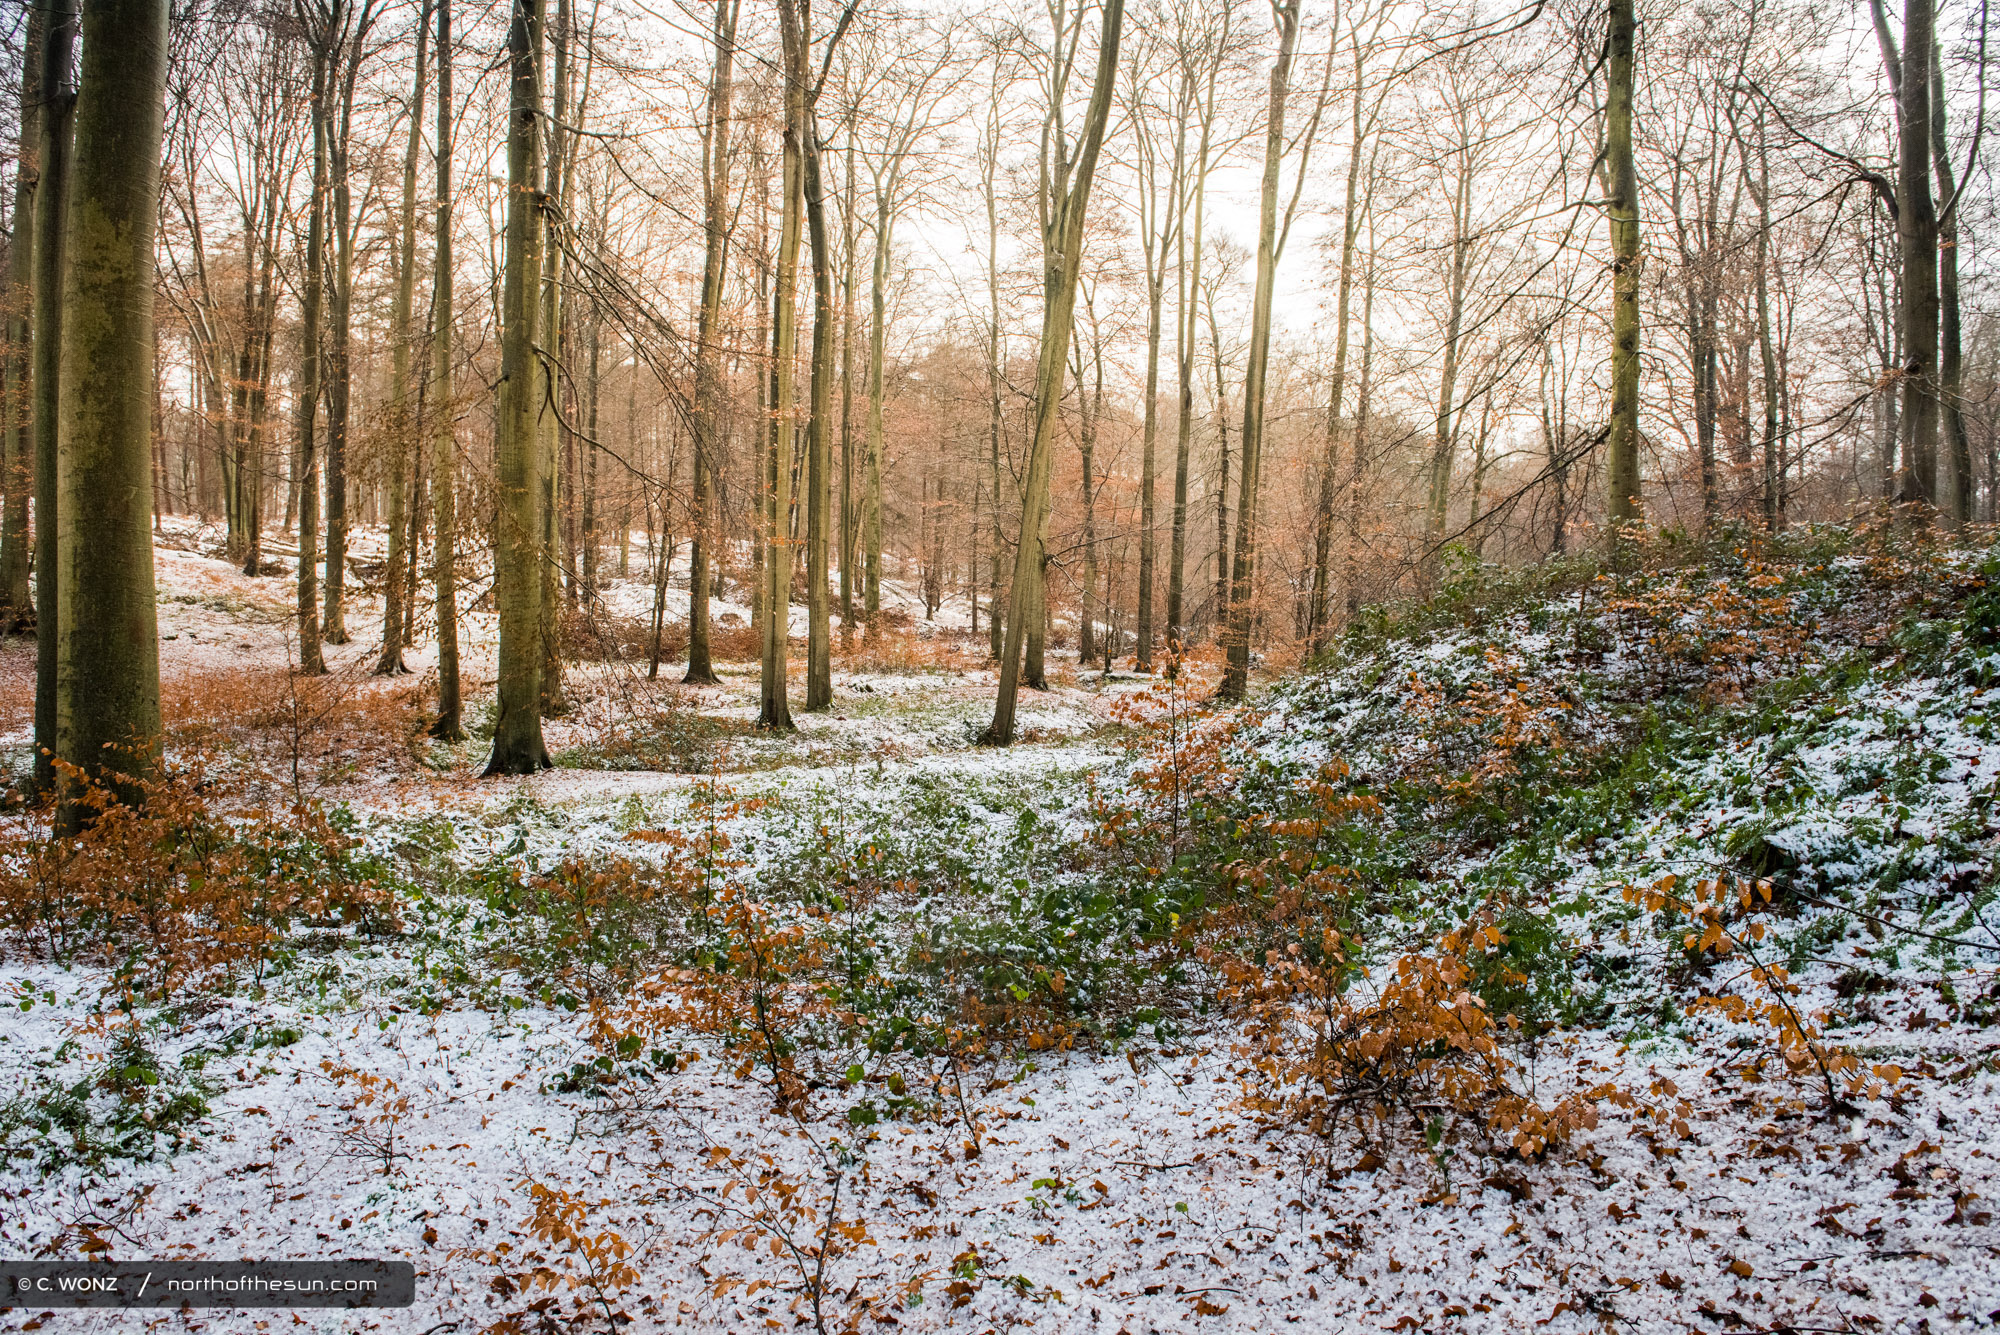 Winter, Brussels, Wood, Forest, Snow, November